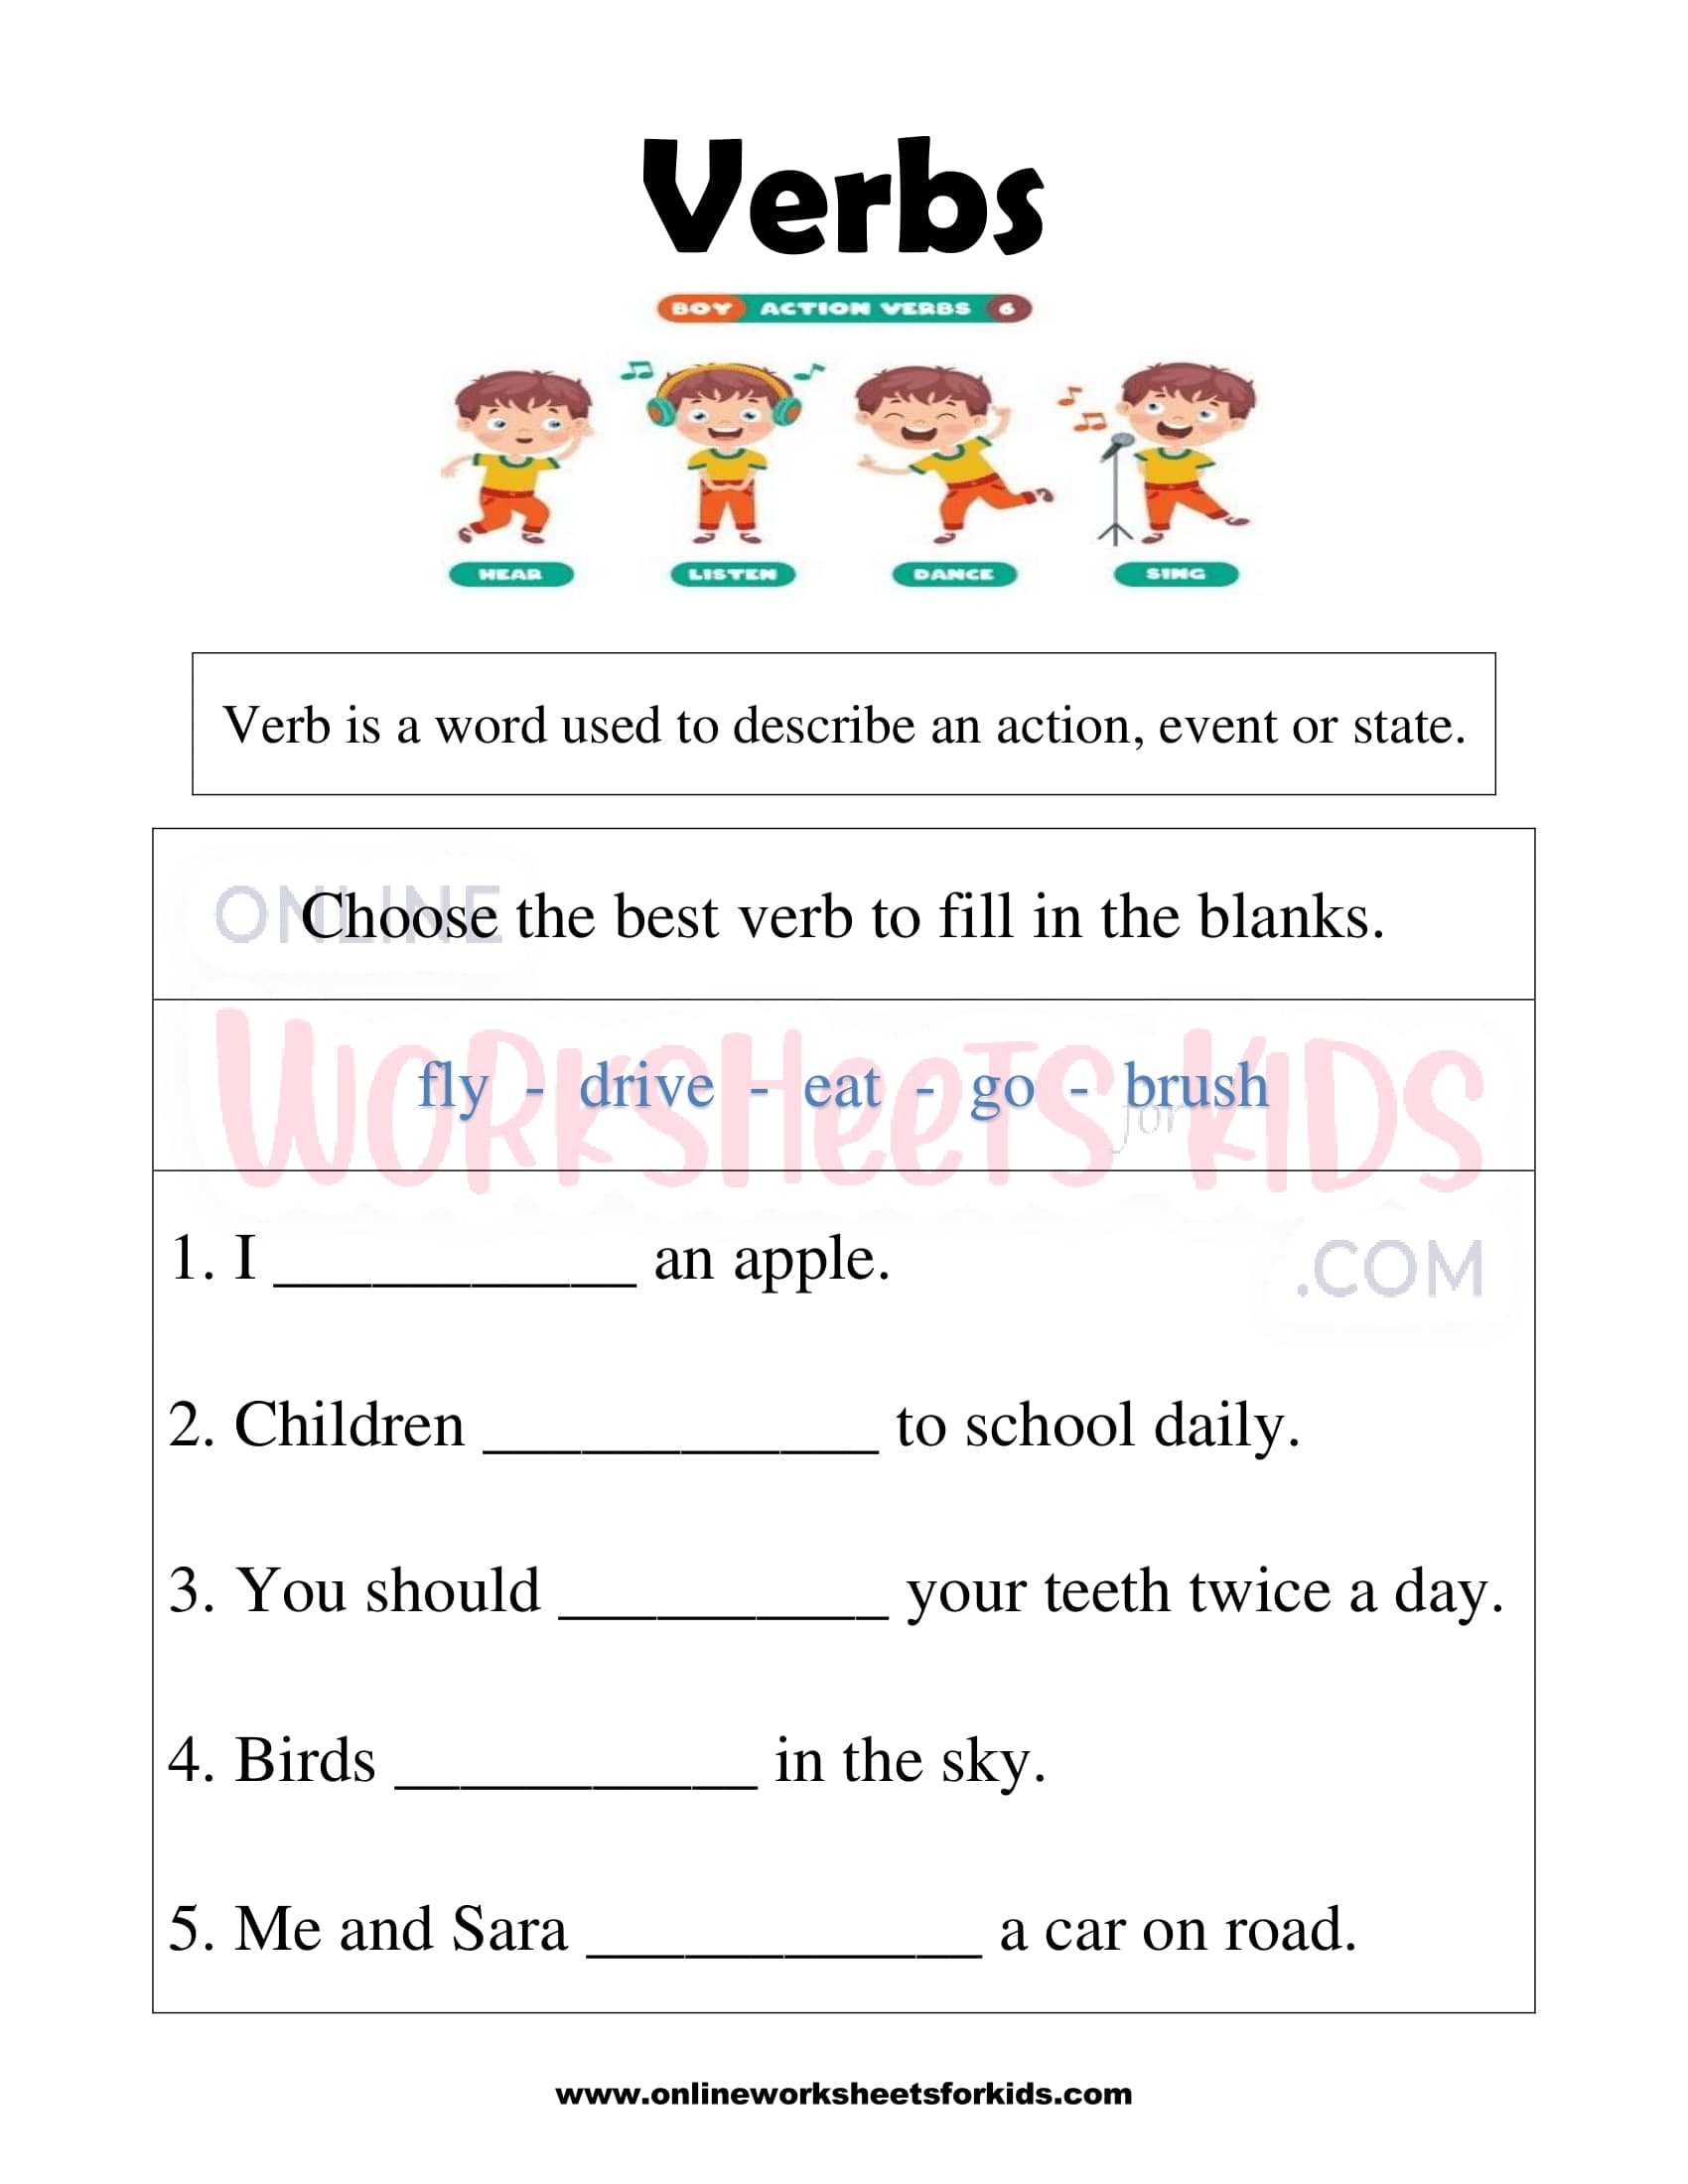 identify-action-verbs-printable-worksheets-for-grade-1-kidpid-verbs-printable-worksheet-pack